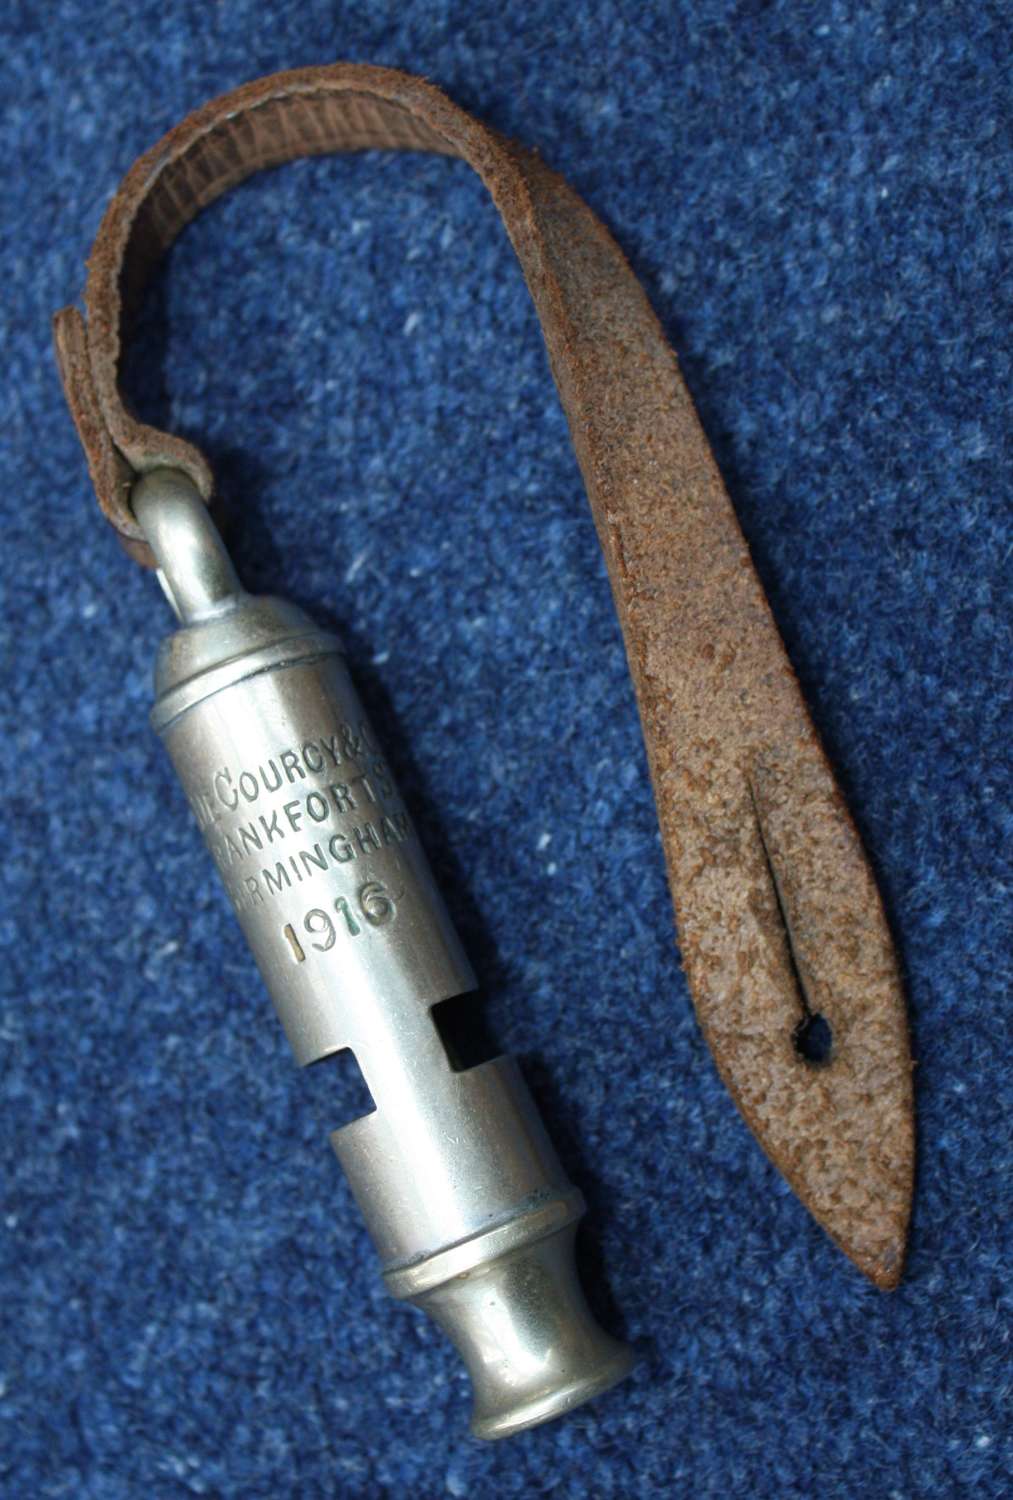 WW1 BRITISH ARMY OFFICERS WHISTLE DATED 1916 DE COURCY BIRMINGHAM